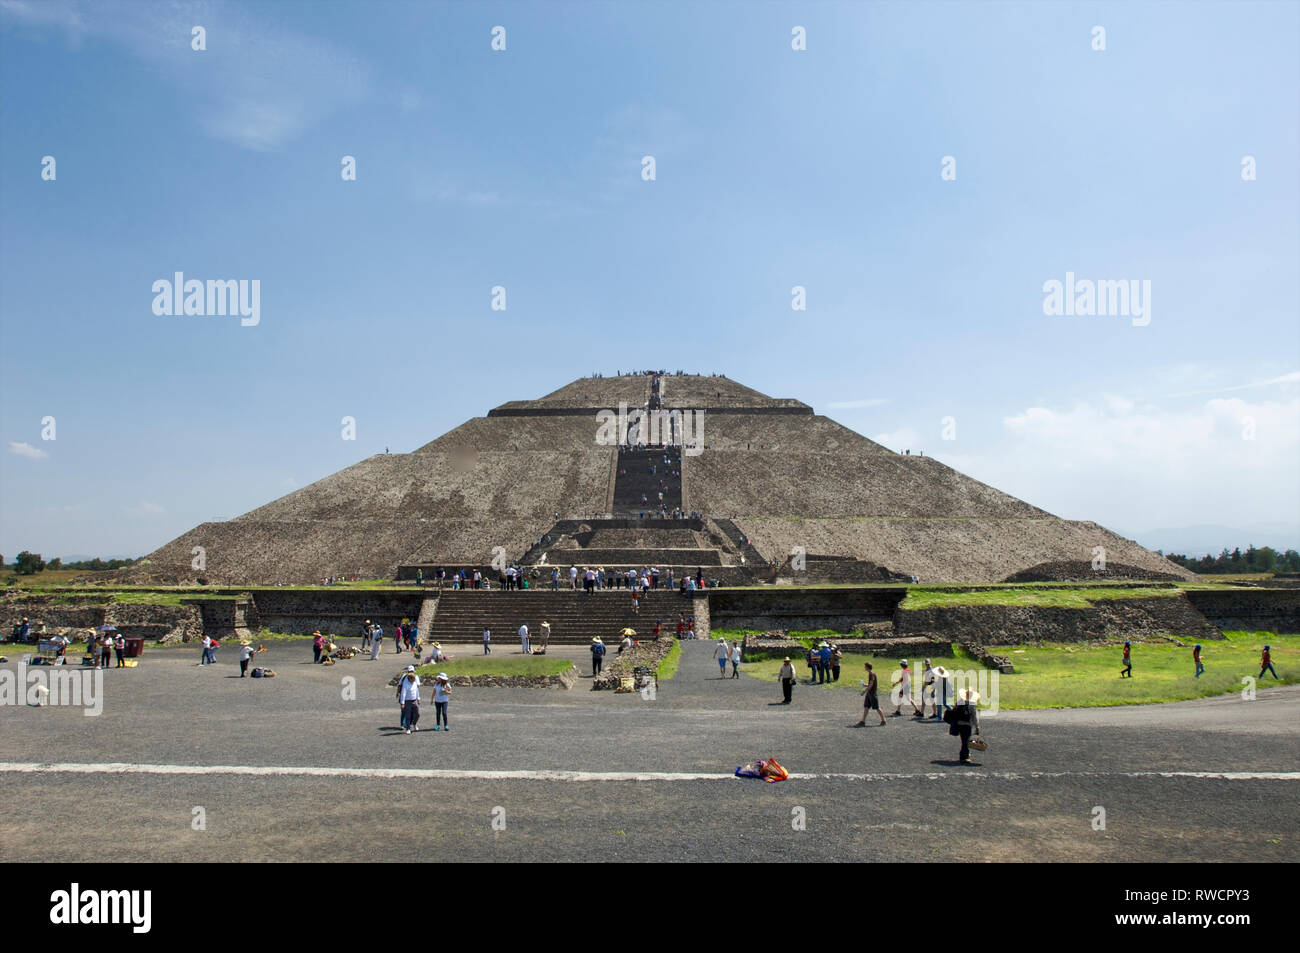 Entrance to the Pyramid of the Sun with tourists at Teotihuacan, Mexico Stock Photo